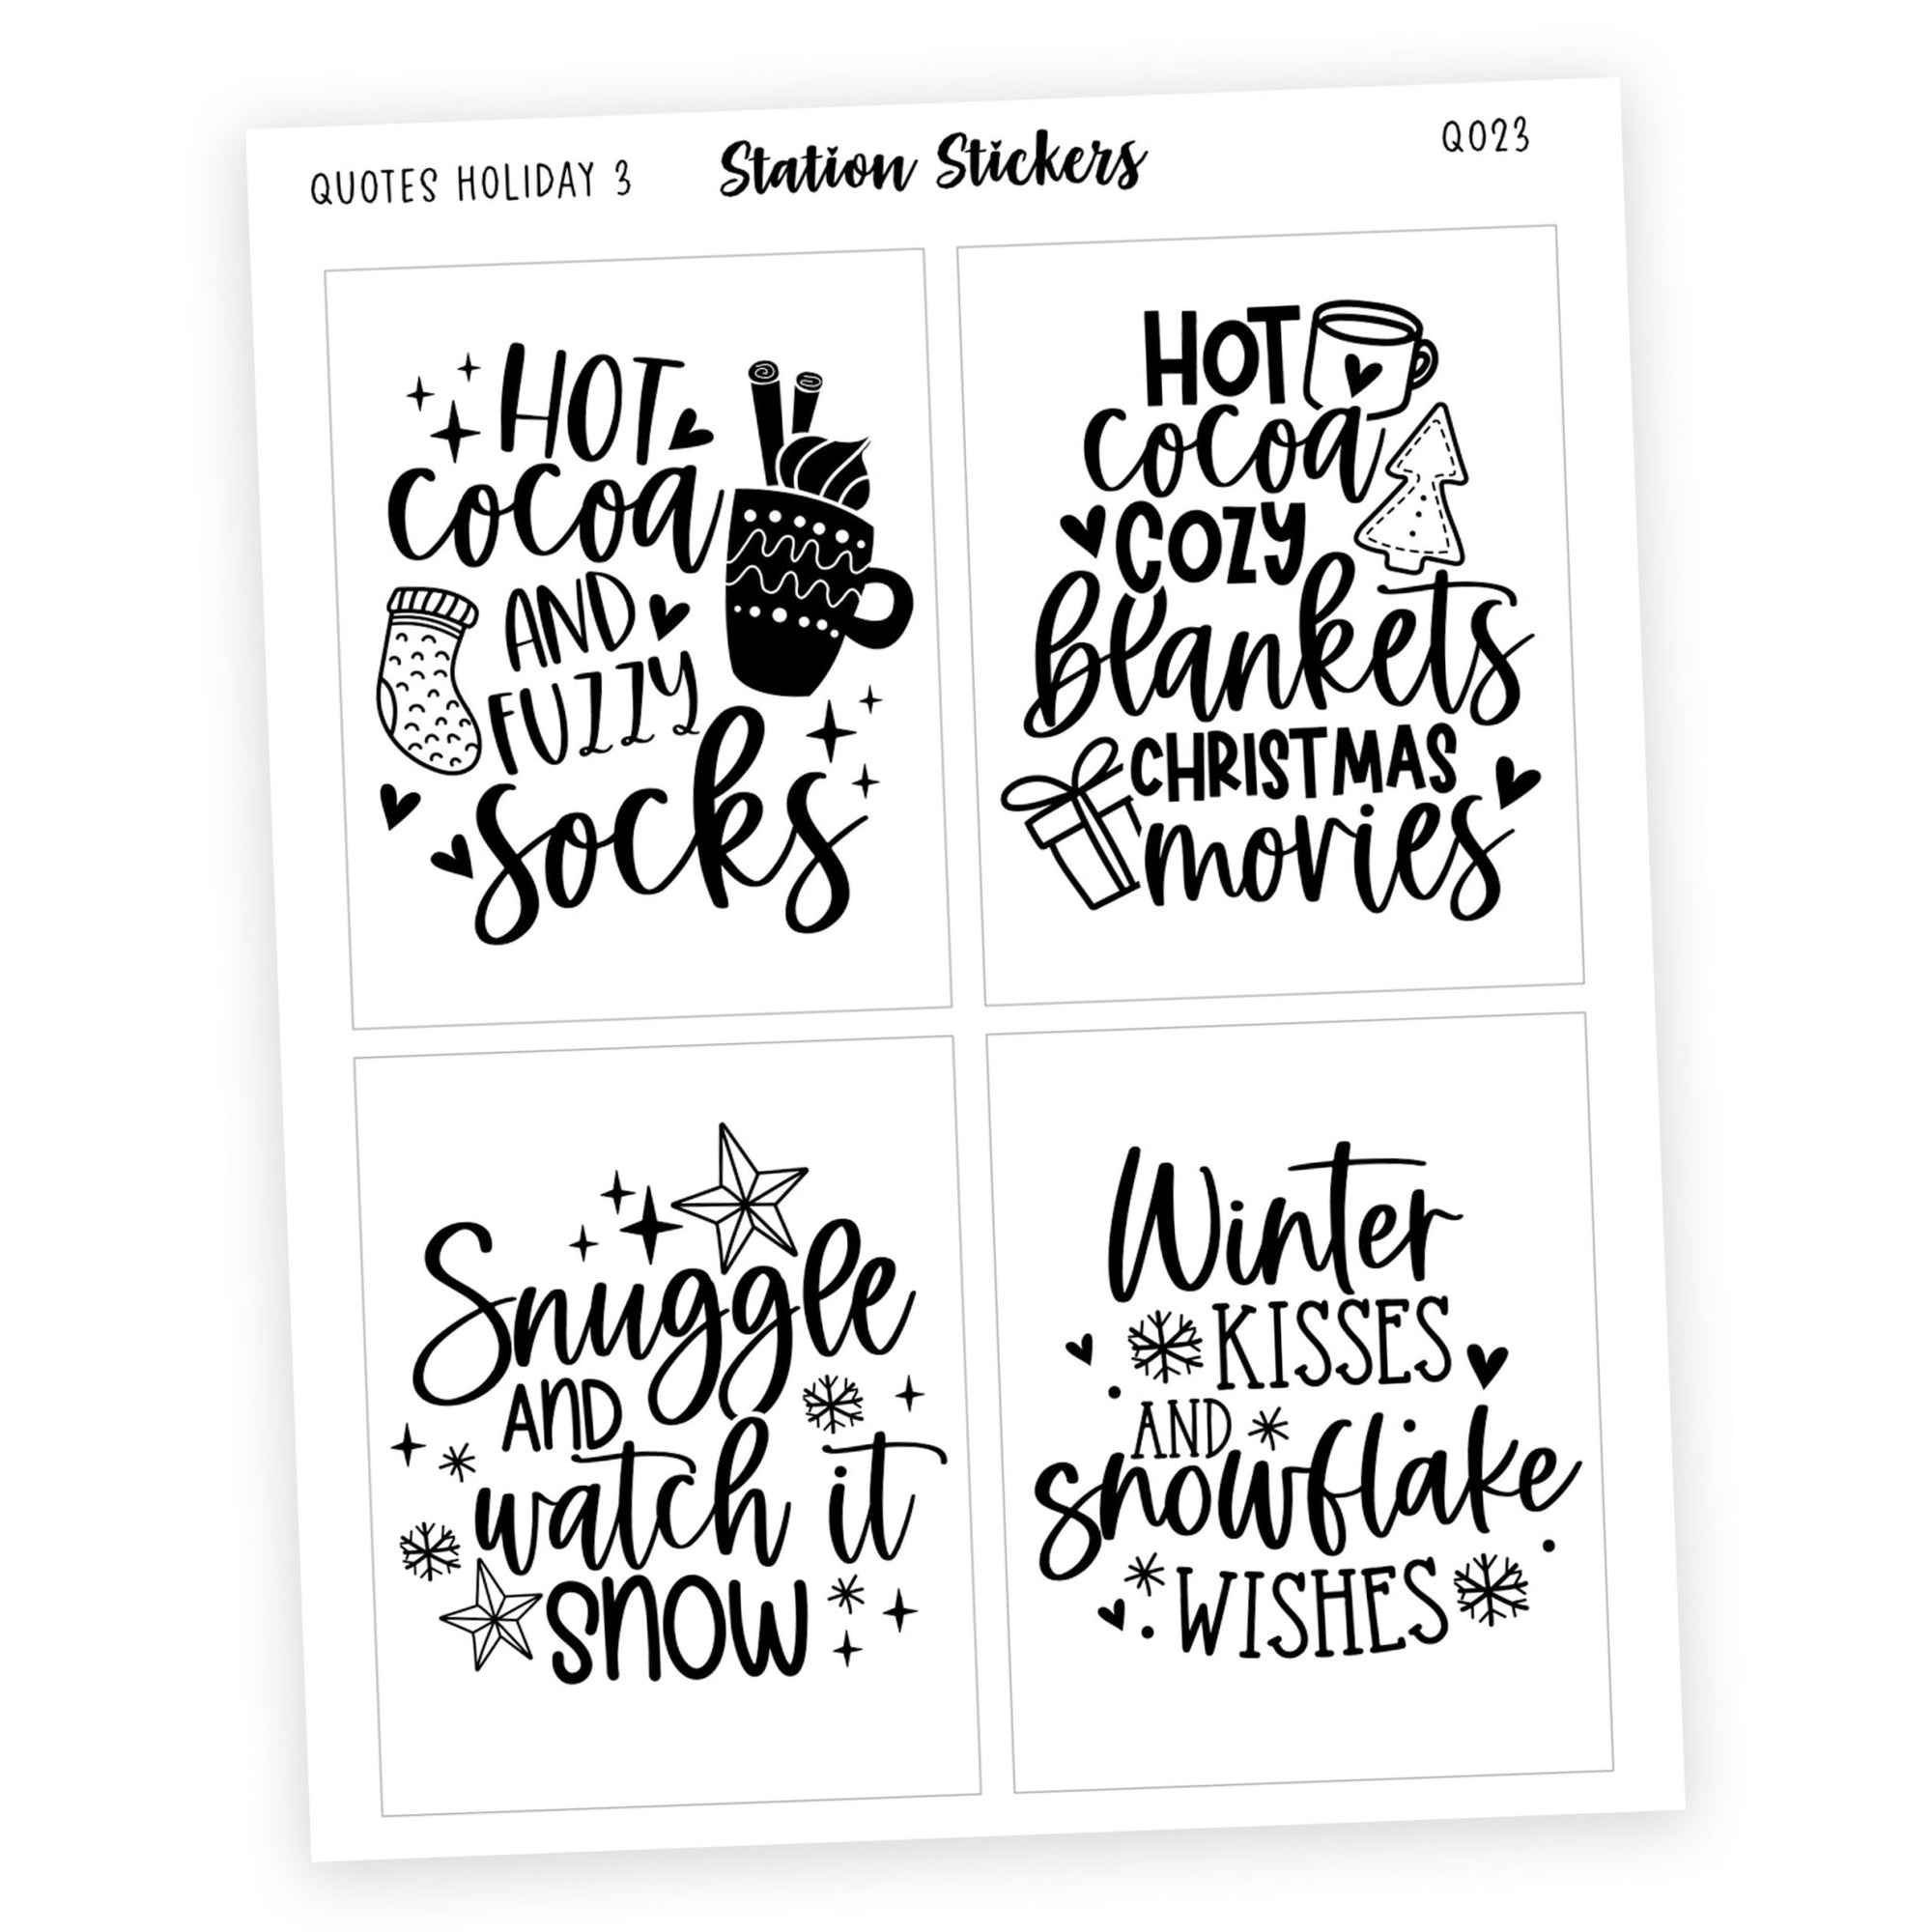 QUOTES • HOLIDAY 3 - Station Stickers